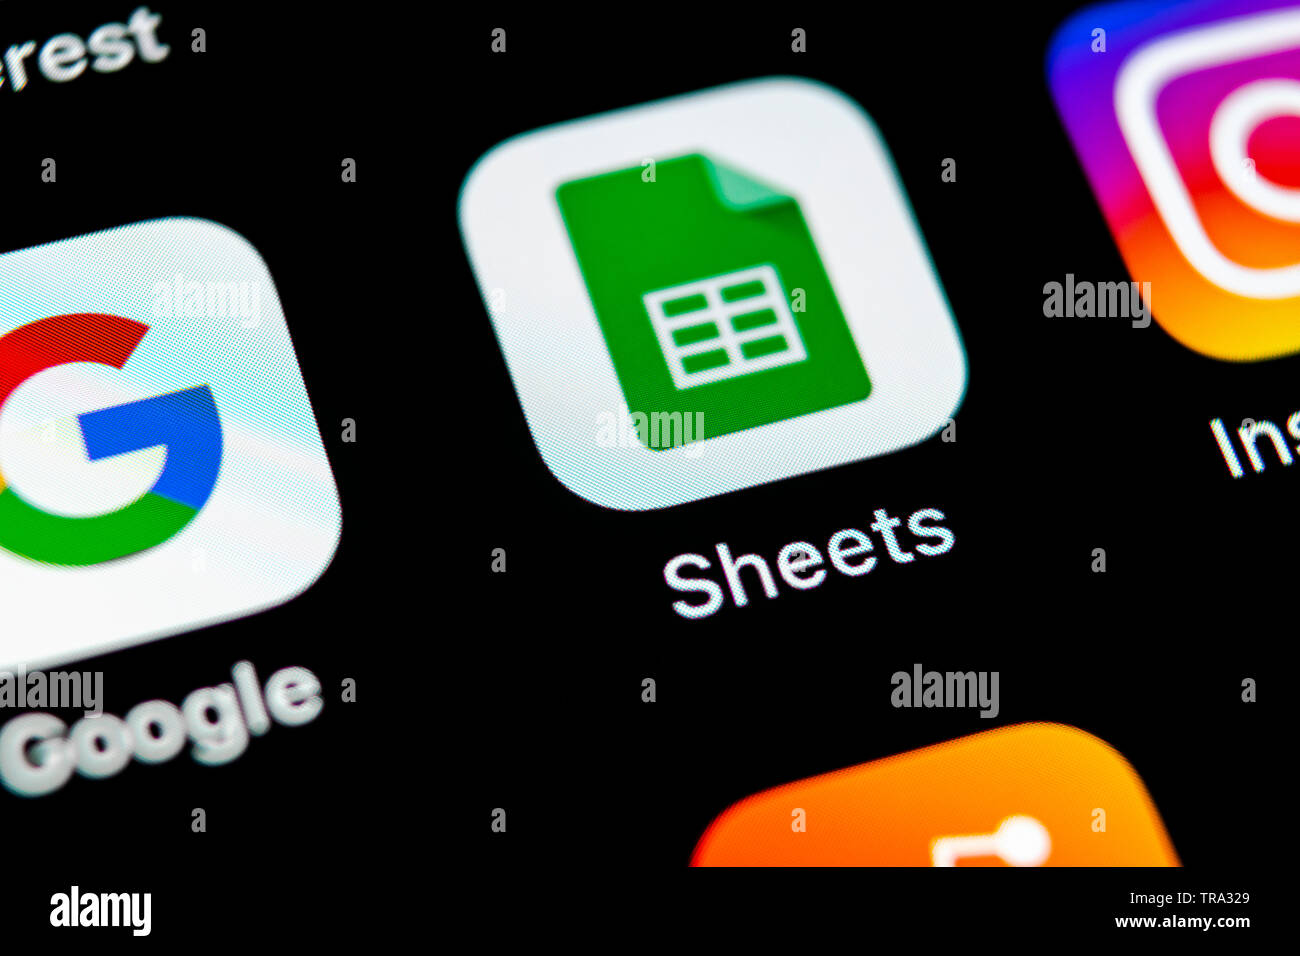 Sankt-Petersburg, Russia, May 10, 2018: Google Sheets icon on Apple iPhone X smartphone screen close-up. Google sheets icon. Social network. Social me Stock Photo